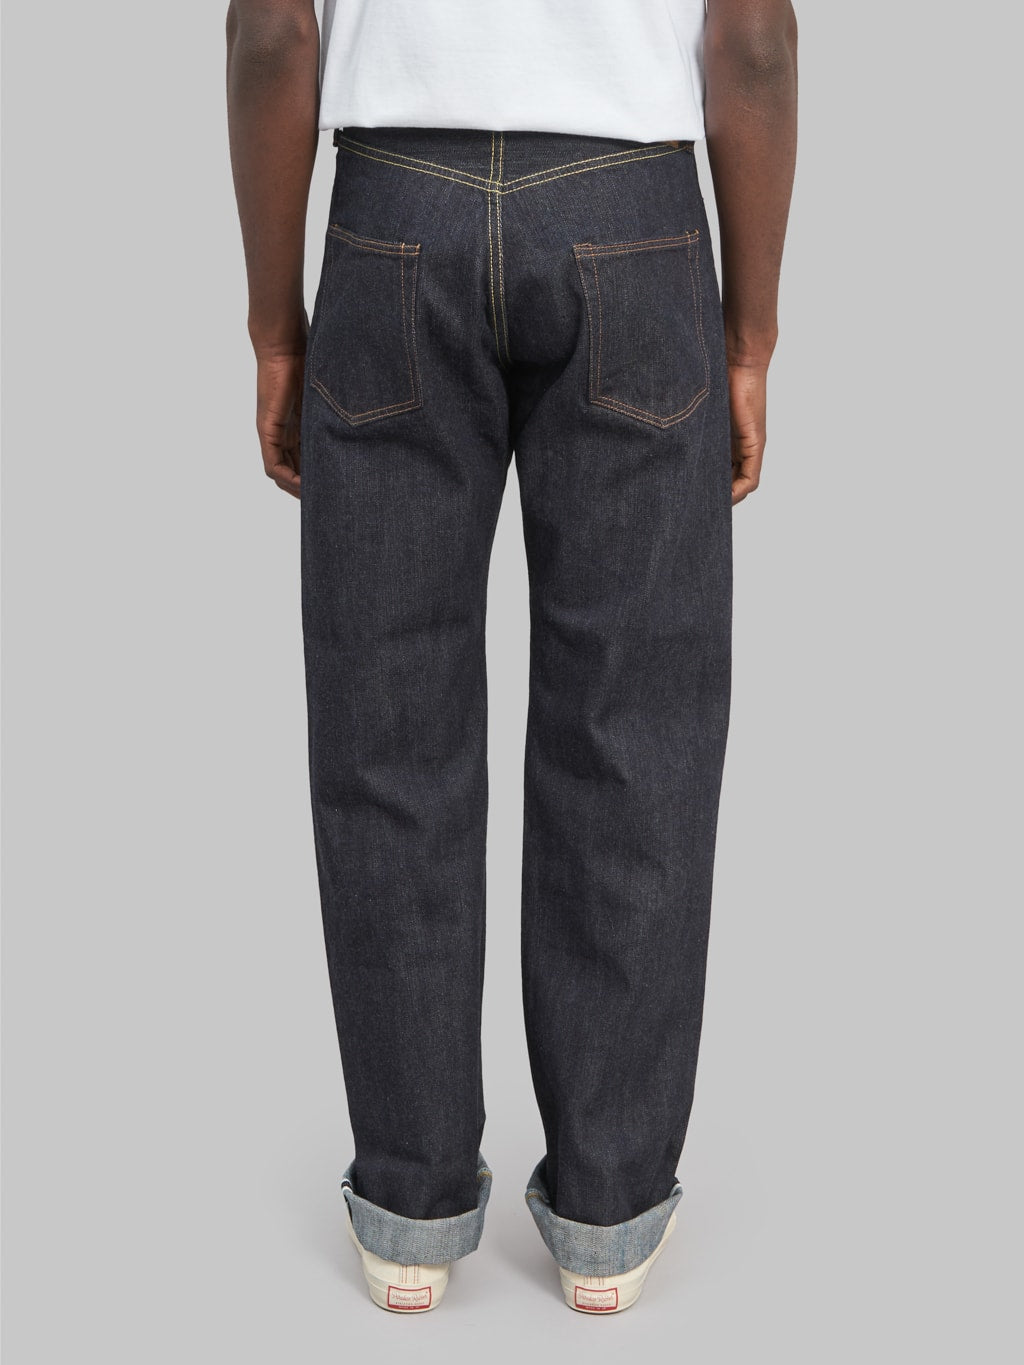 the flat head fn d111 wide straight selvedge denim jeans back fit